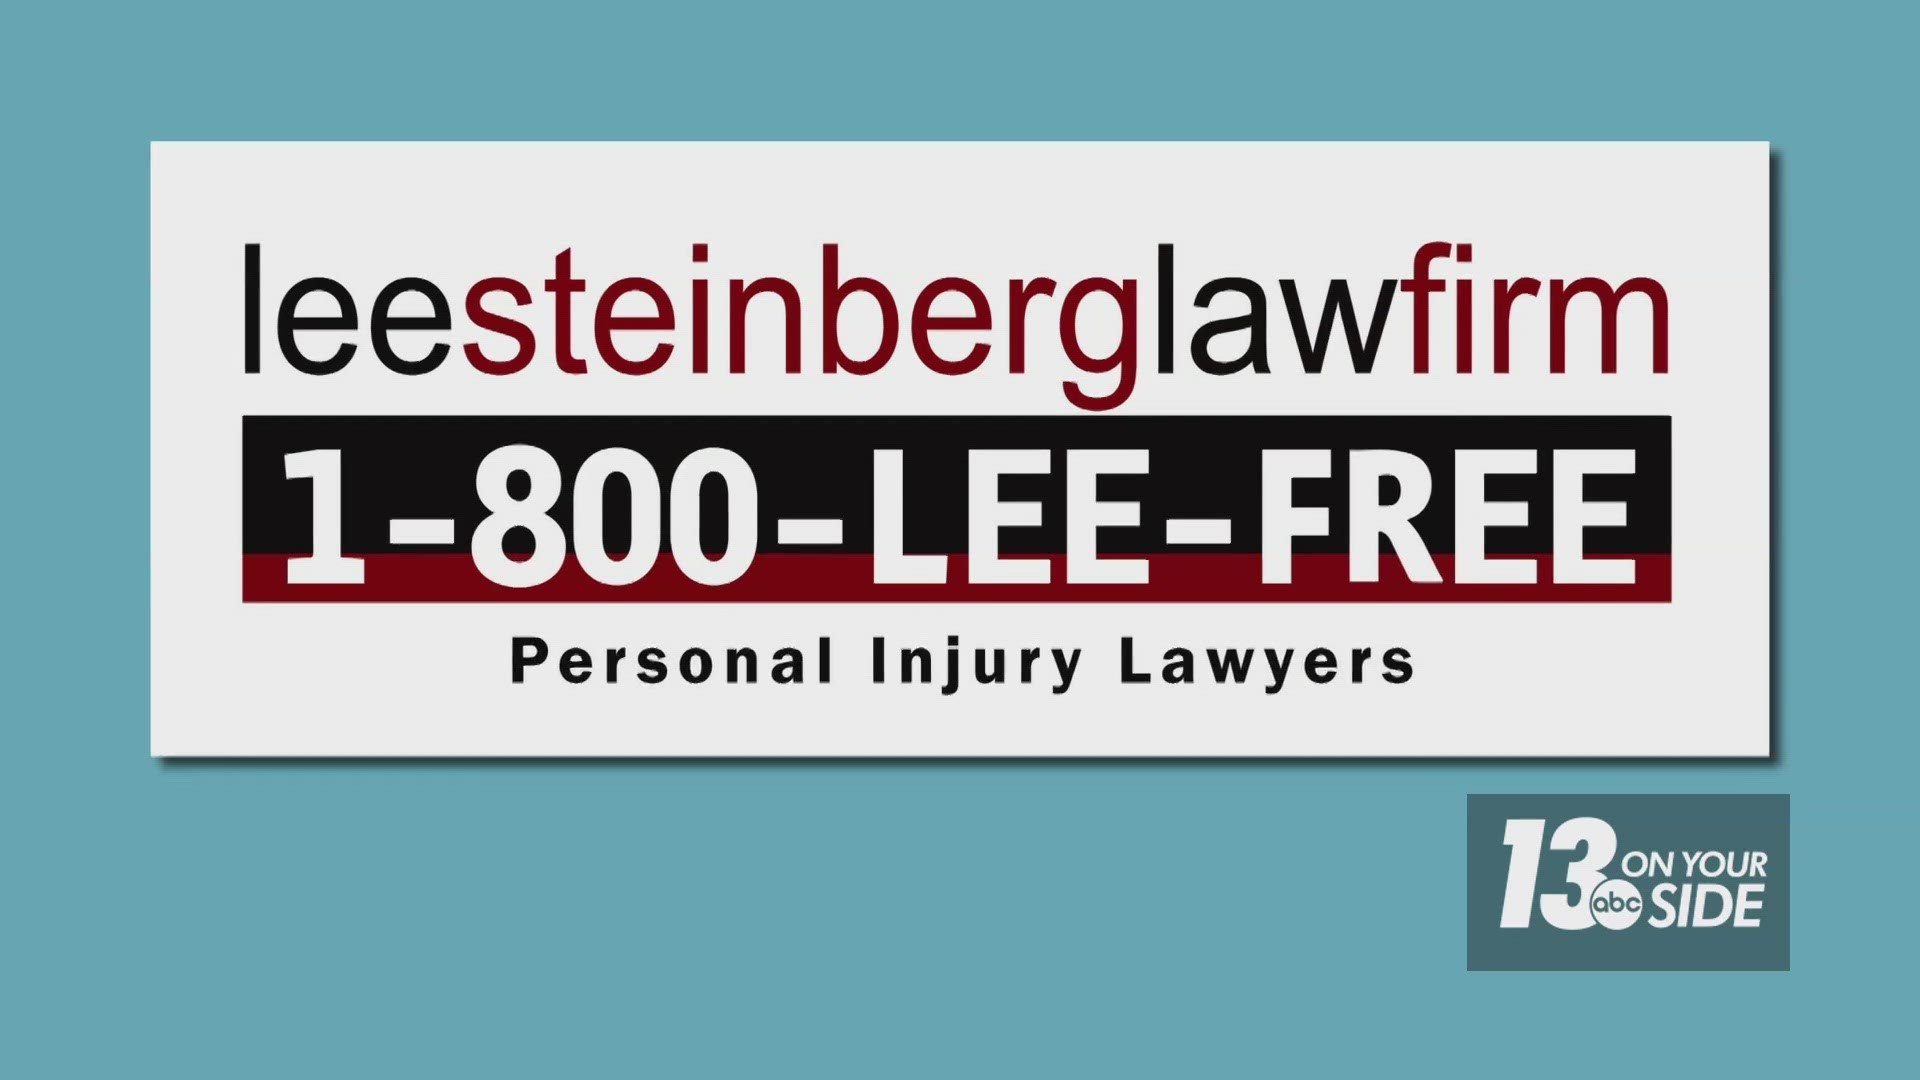 For almost 50 years, the Lee Steinberg Law Firm, PC has been the leader in personal injury cases across Michigan.